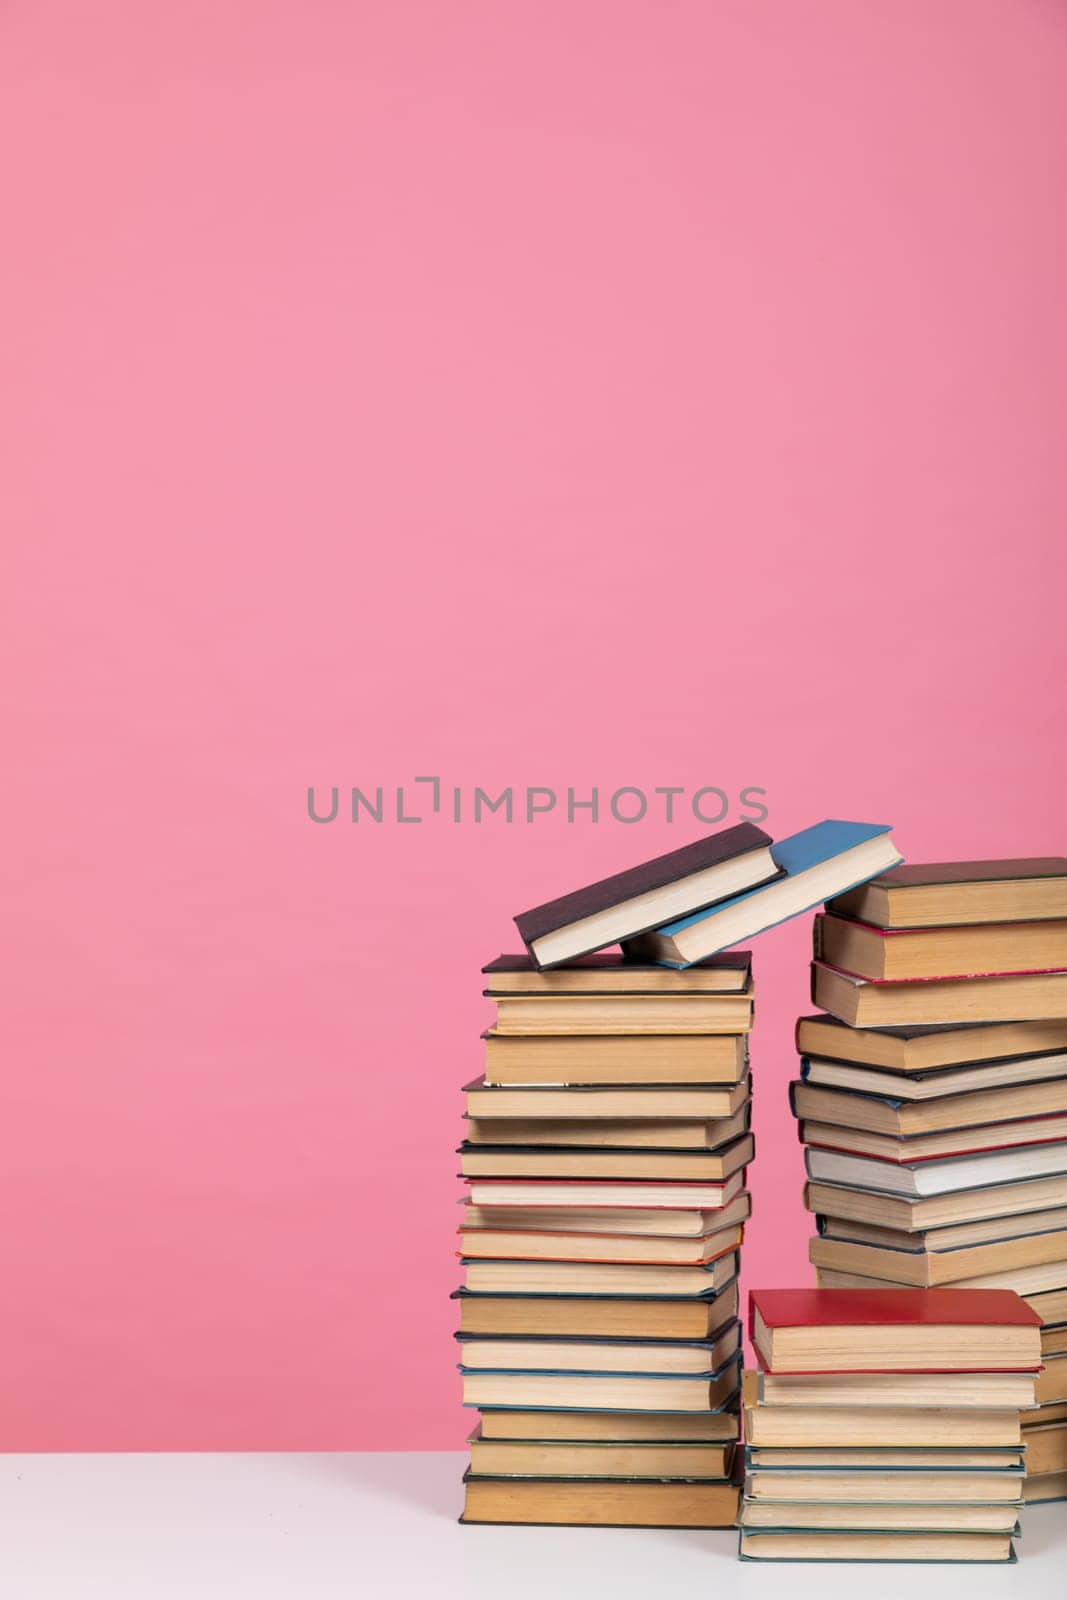 a science education stack of books on pink background literacy training